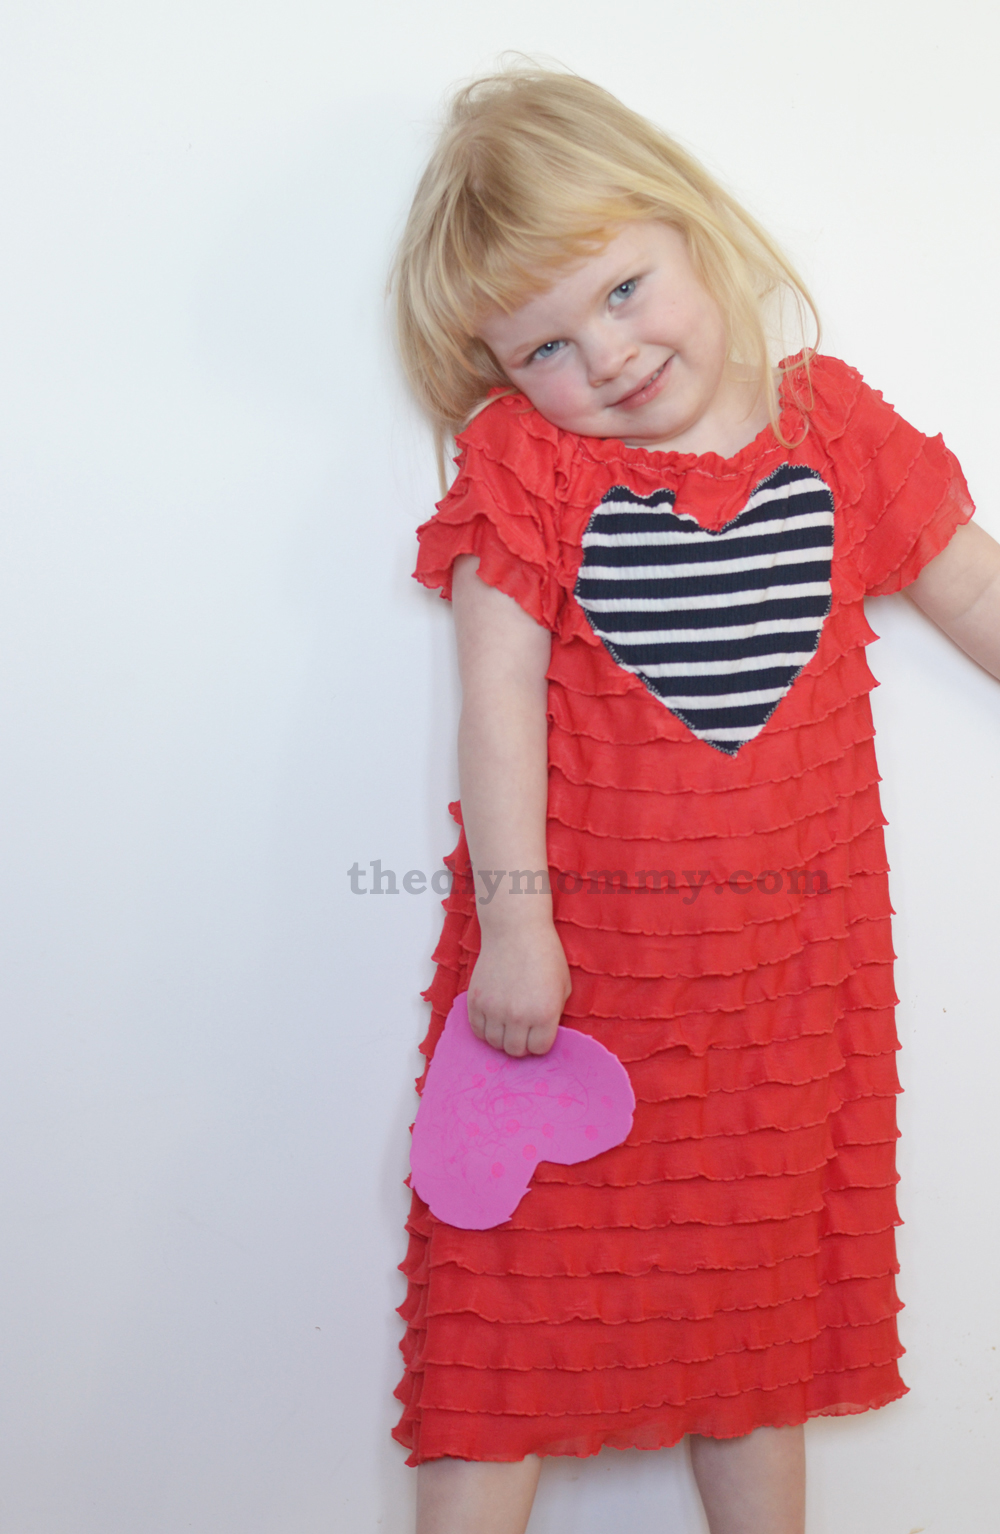 Sew an Easy Valentine Dress with Ruffle Fabric by The DIY Mommy